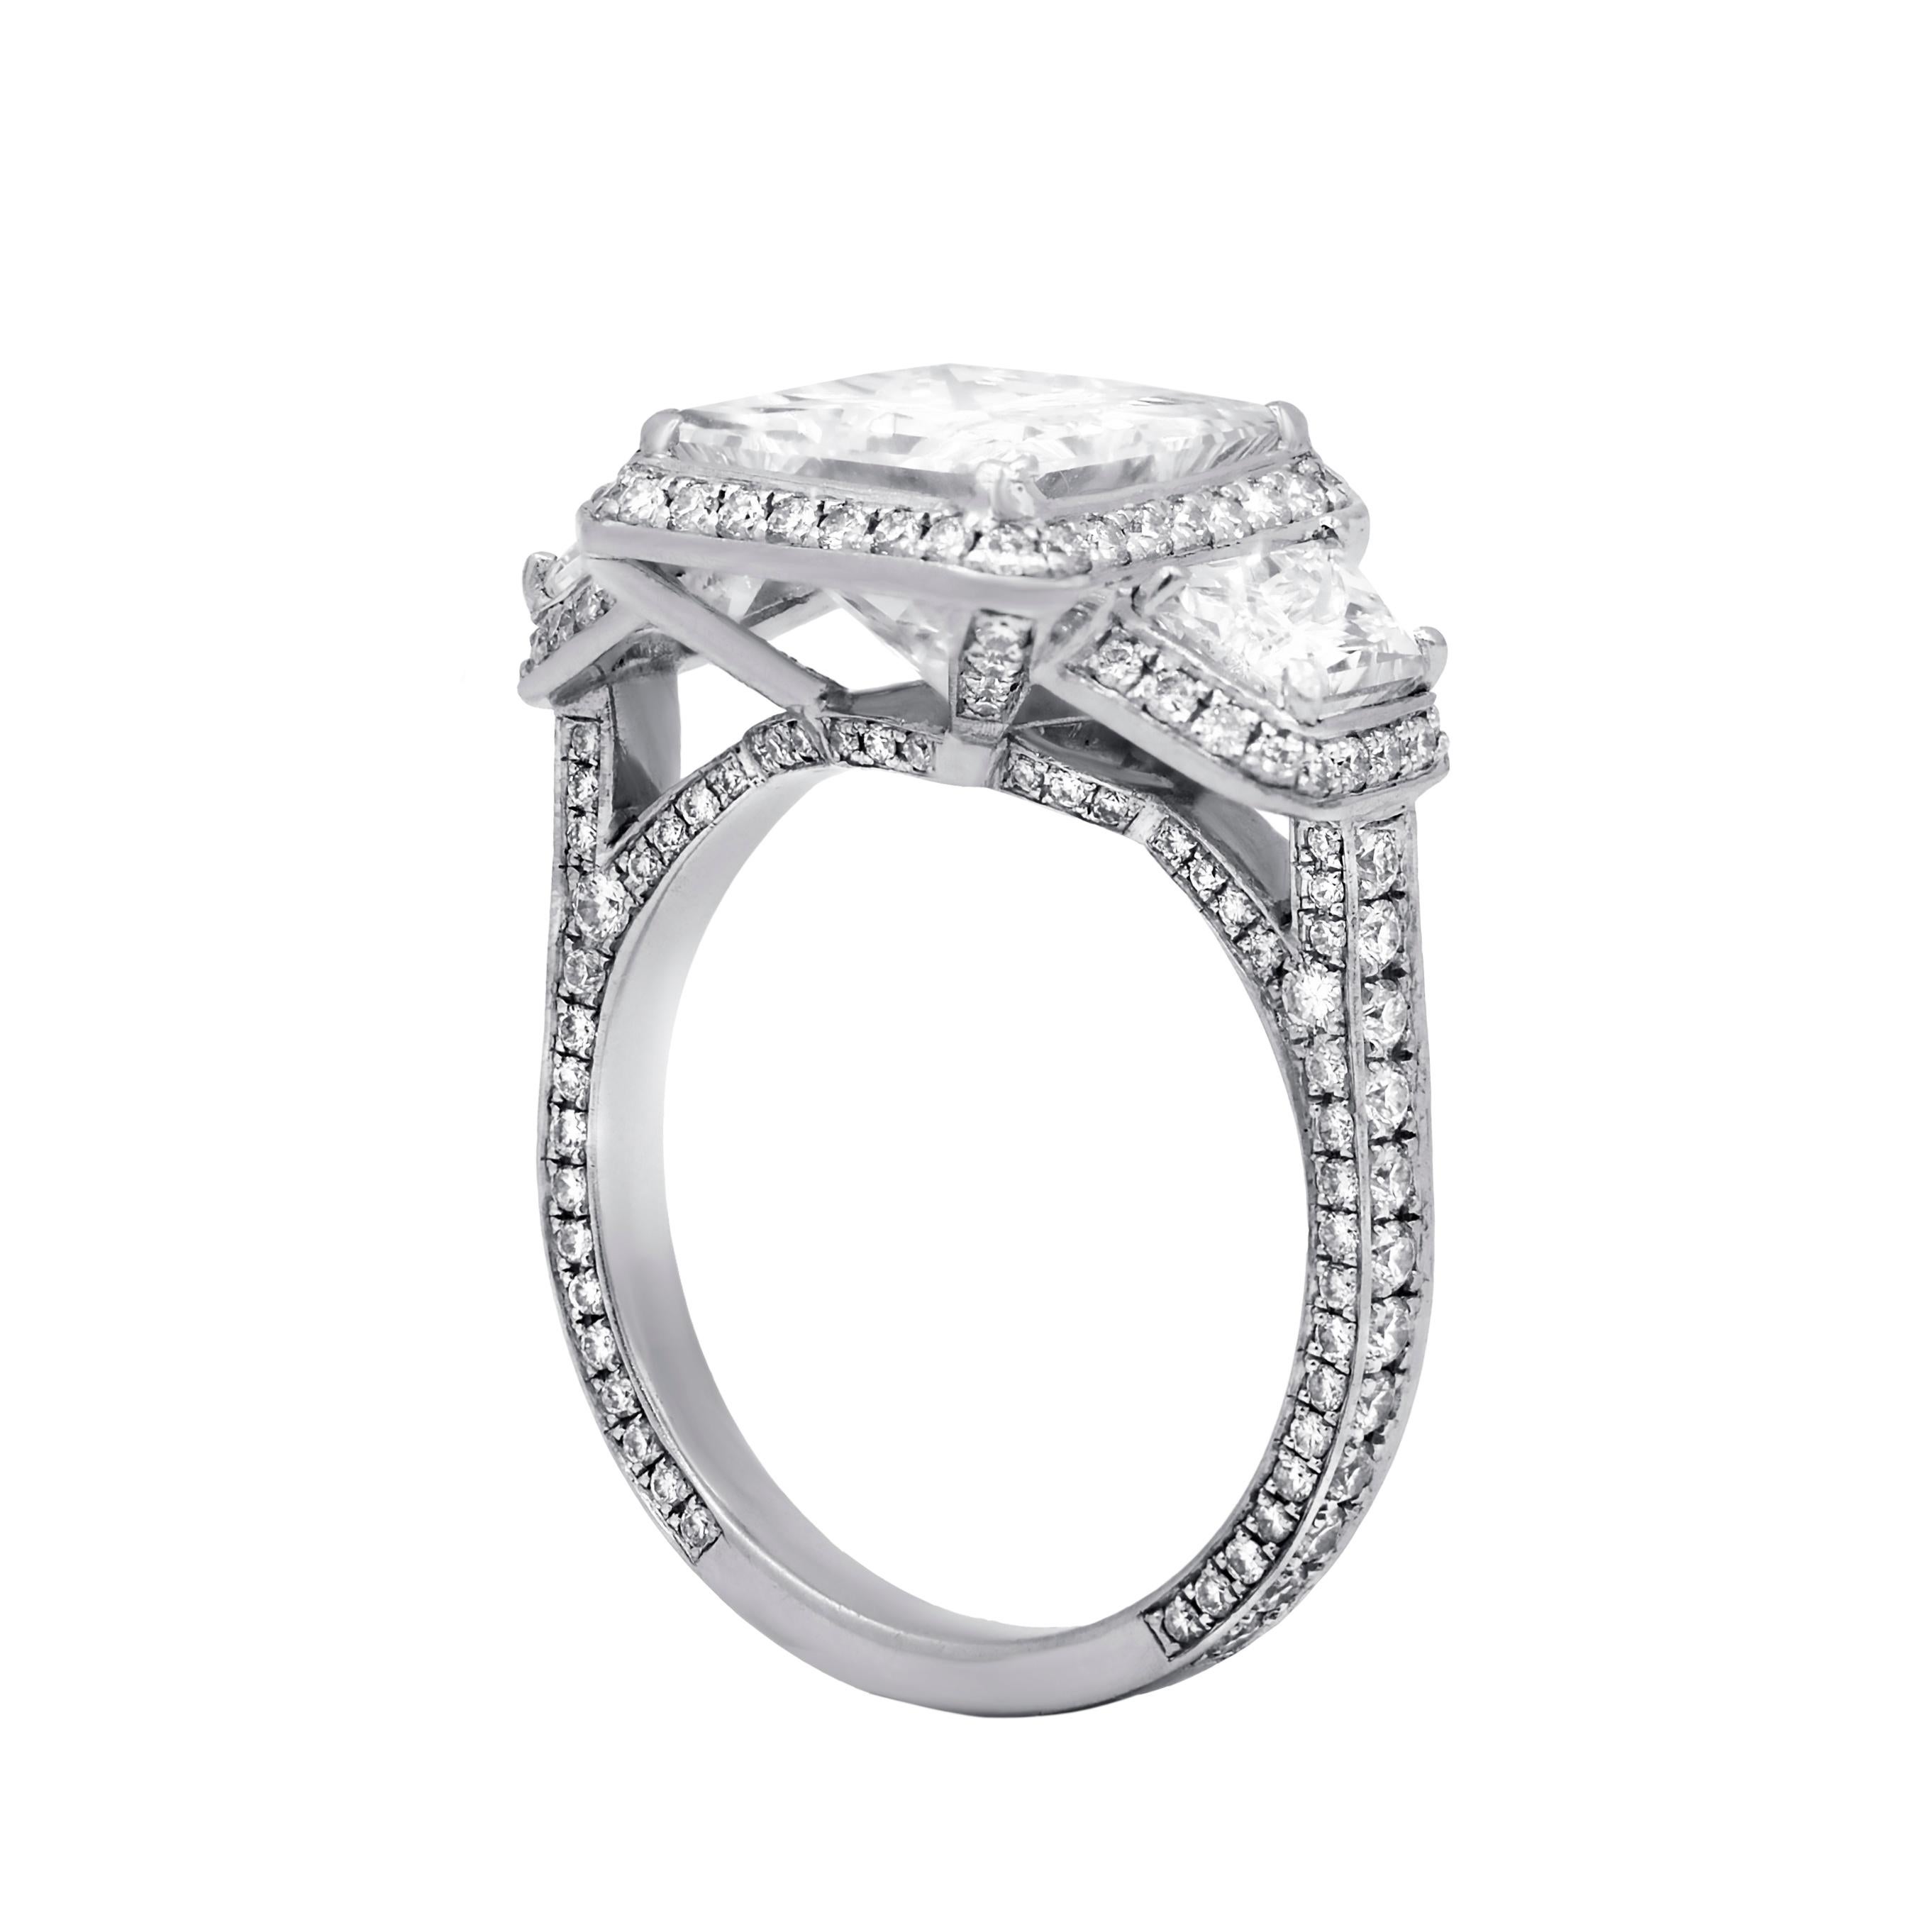 Platinum engagement ring featuring a center (I-VVS1) 3.45 ct princess cut diamond with 2.47 cts tw of trapezoid diamonds on the sides 
Diana M. is a leading supplier of top-quality fine jewelry for over 35 years.
Diana M is one-stop shop for all